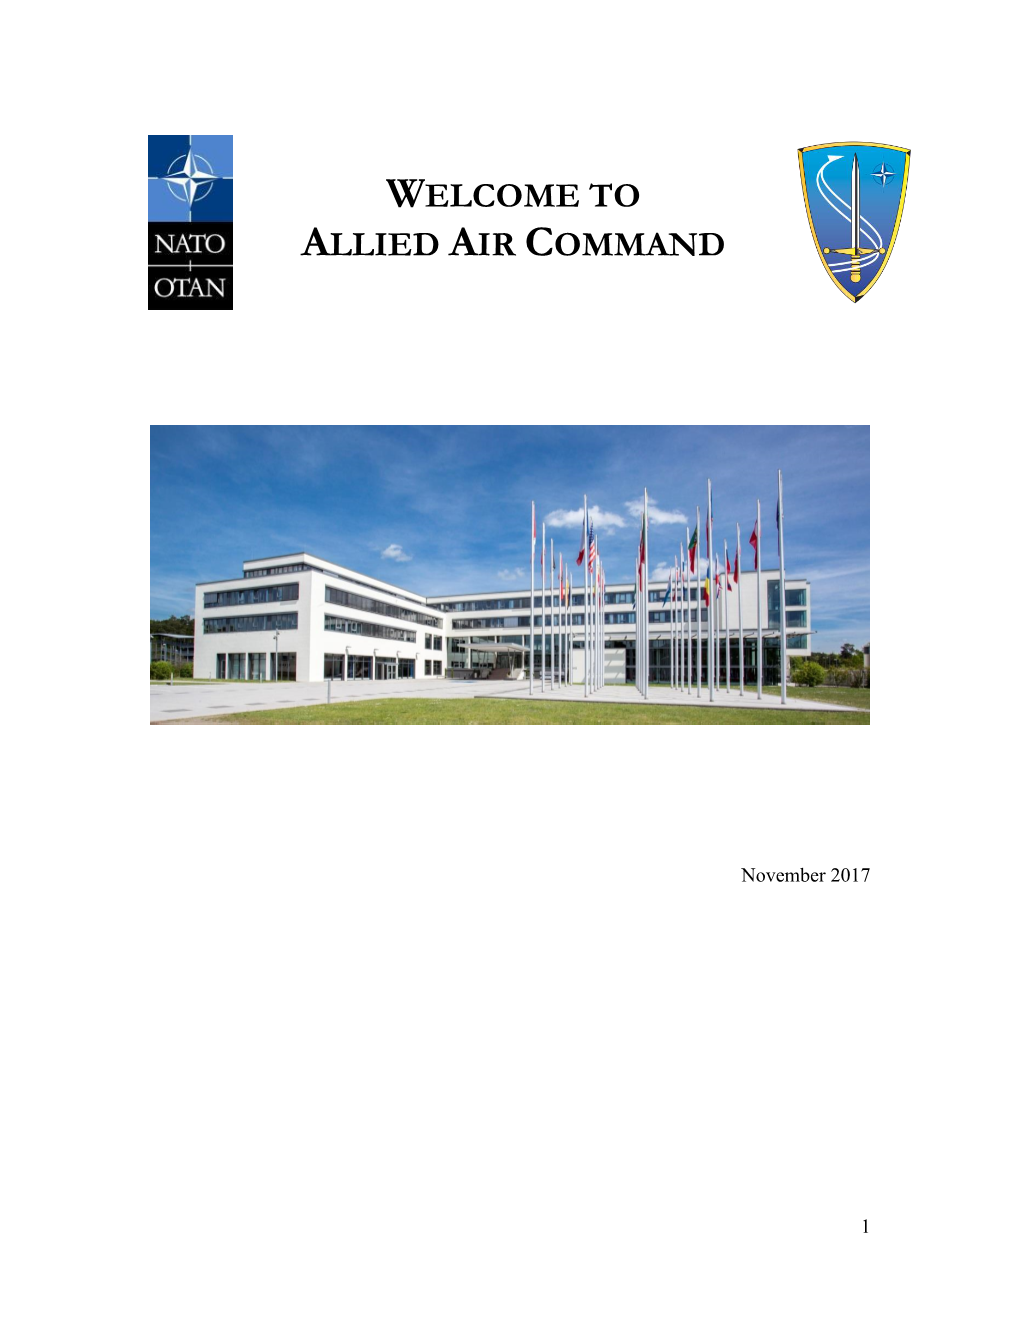 Welcome to Allied Air Command